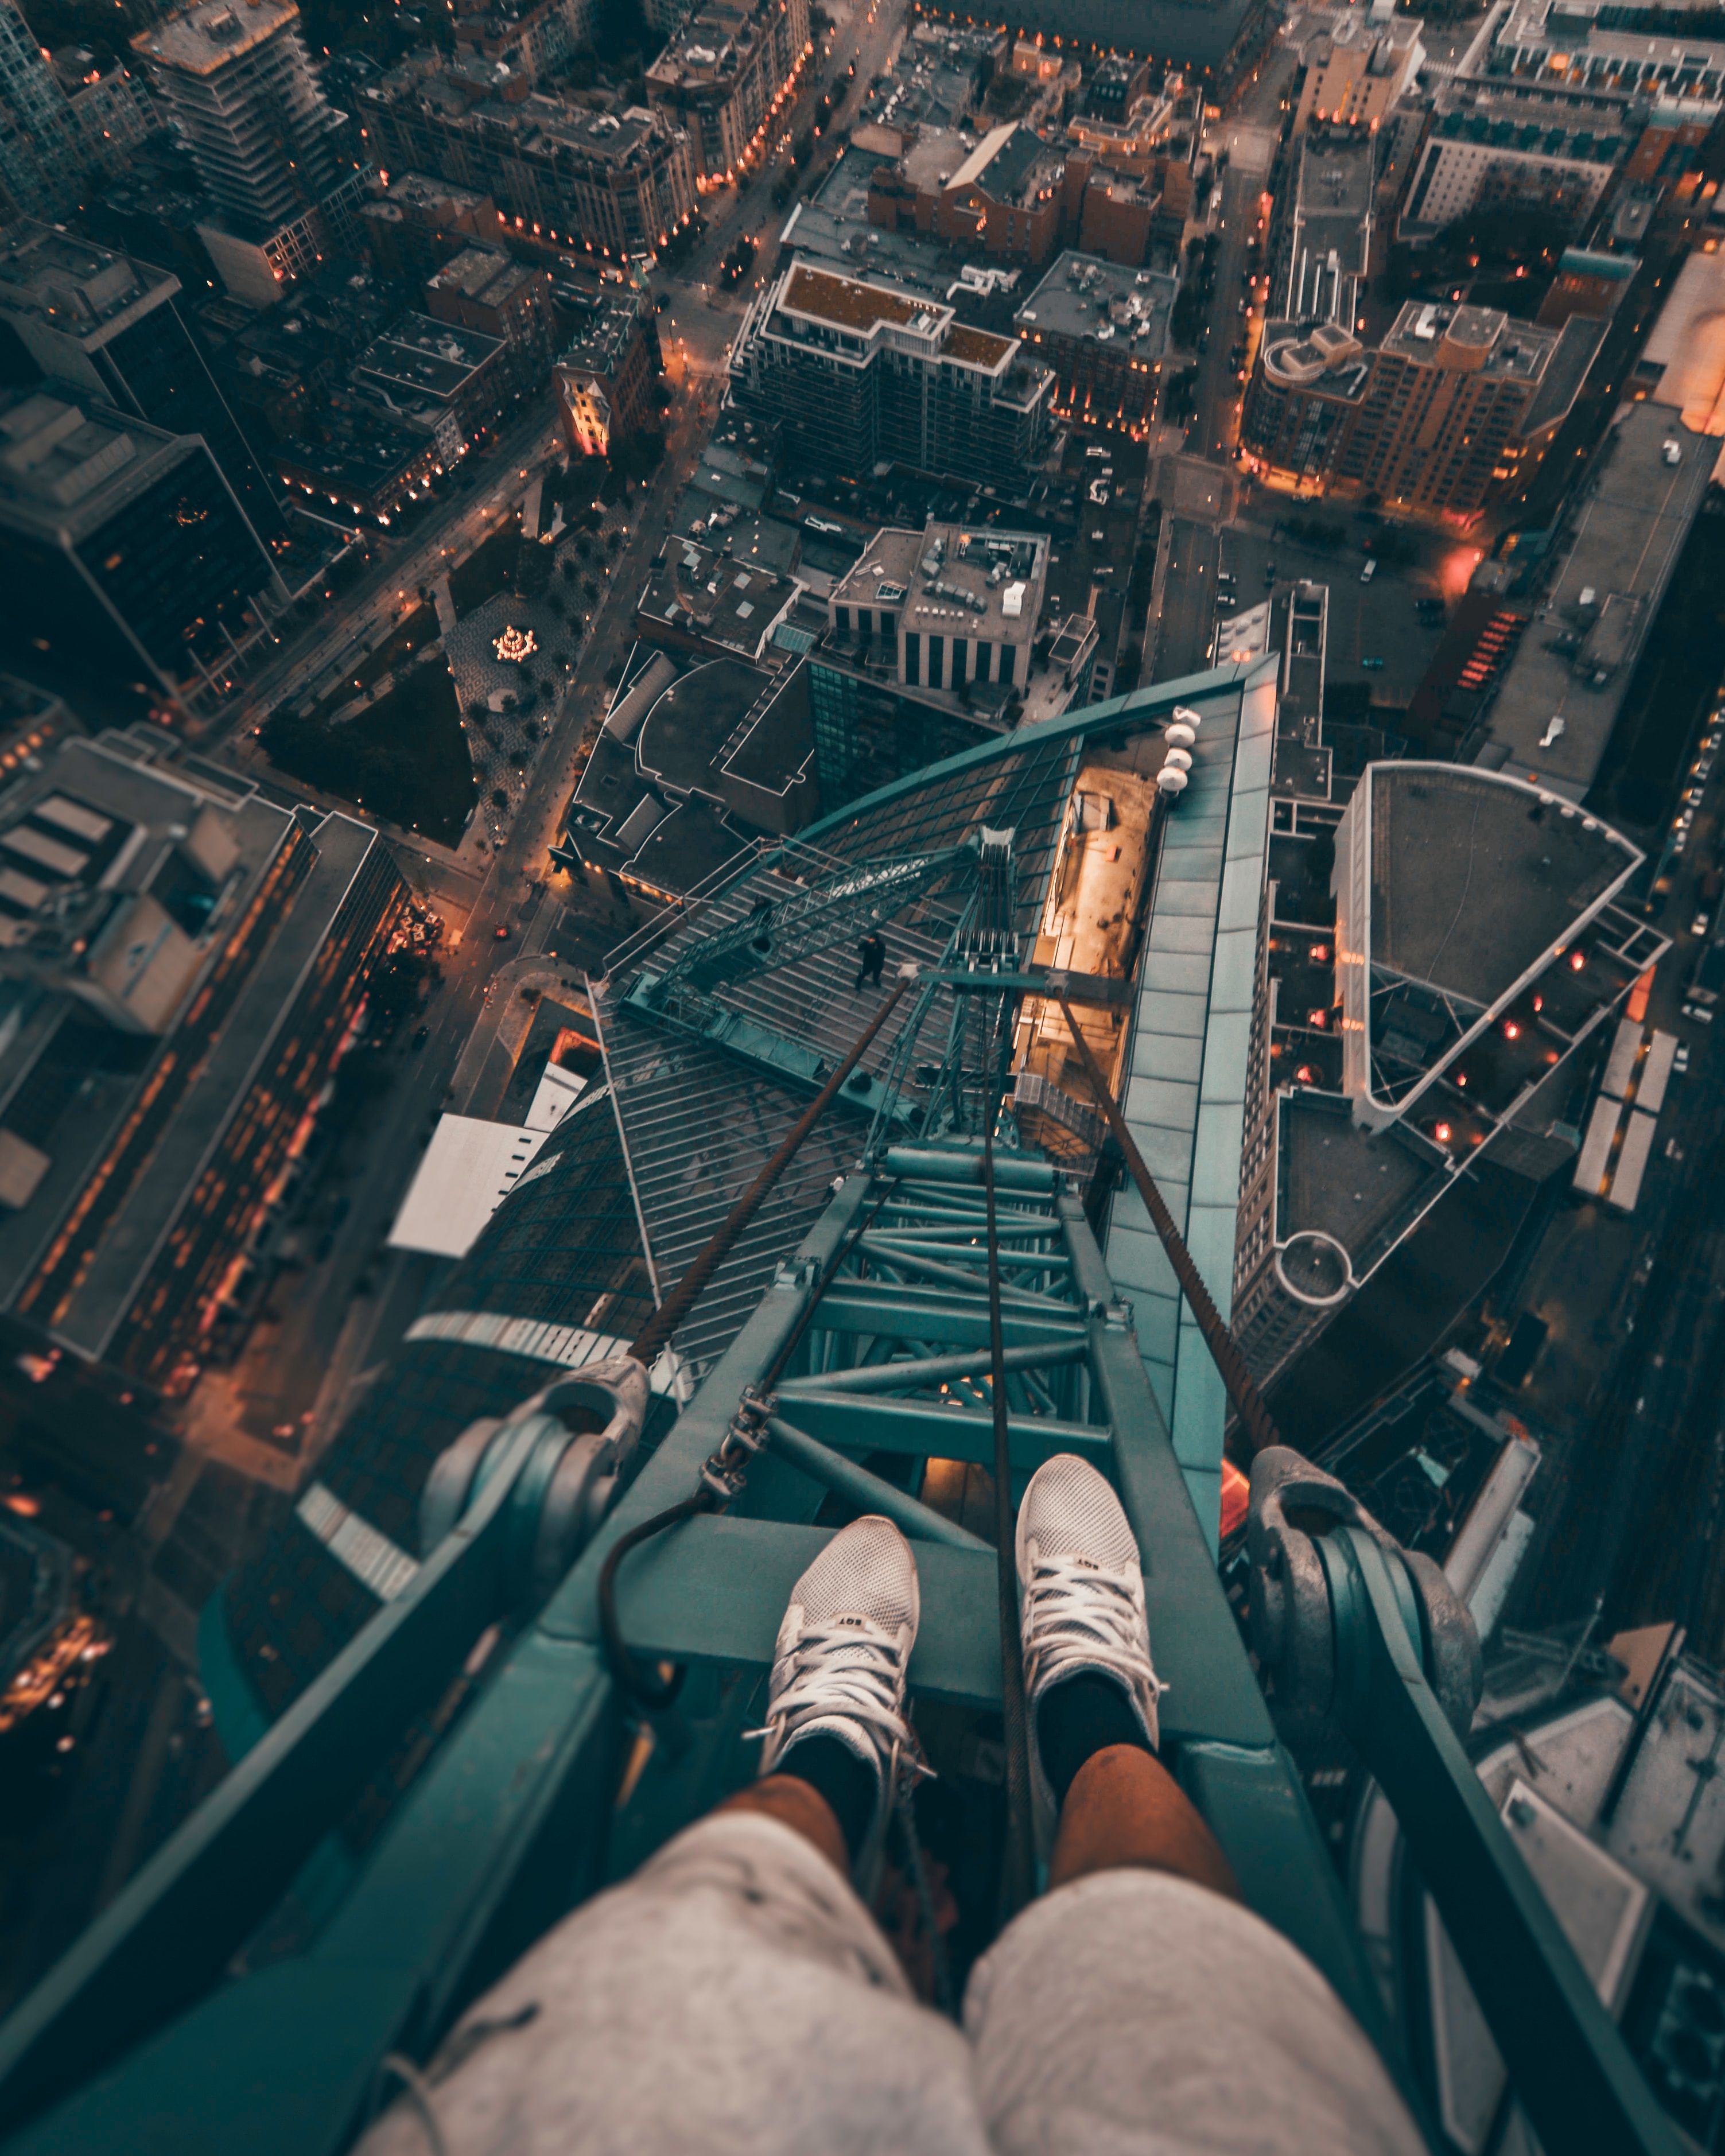 An individual who is about to bungee jump. │Source: Unsplash